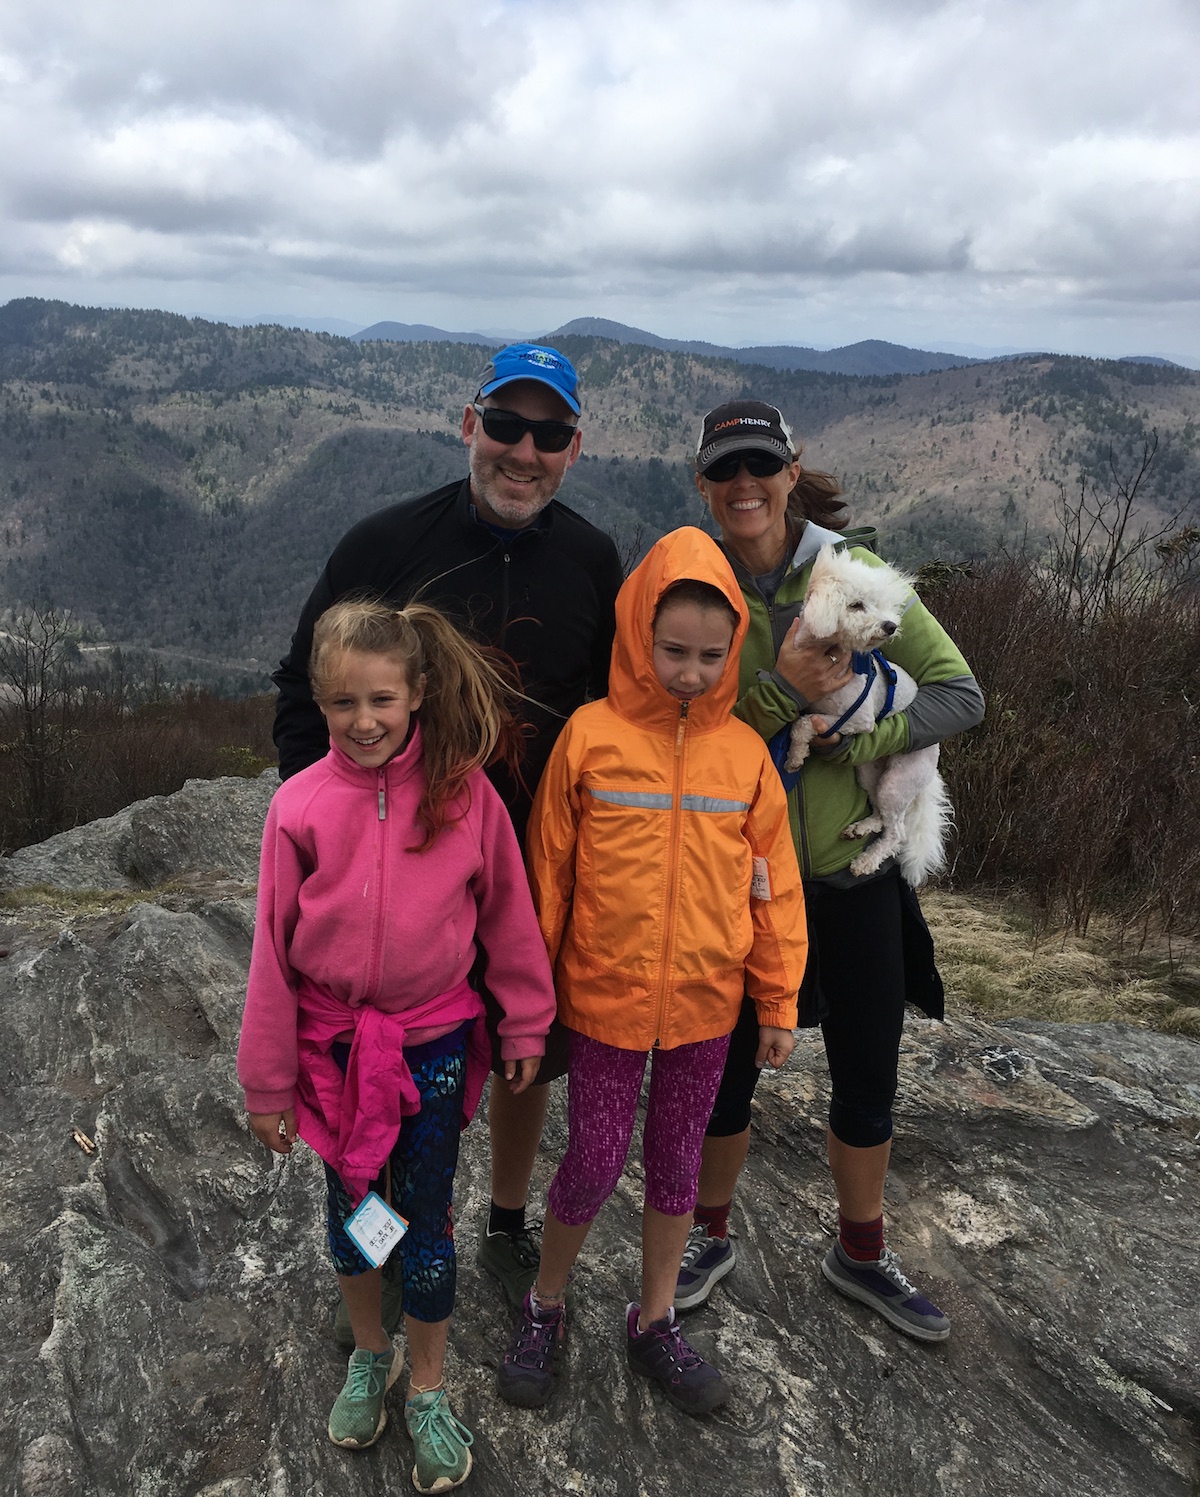 Andrew Bobilya and his family smile while hiking in North Carolina